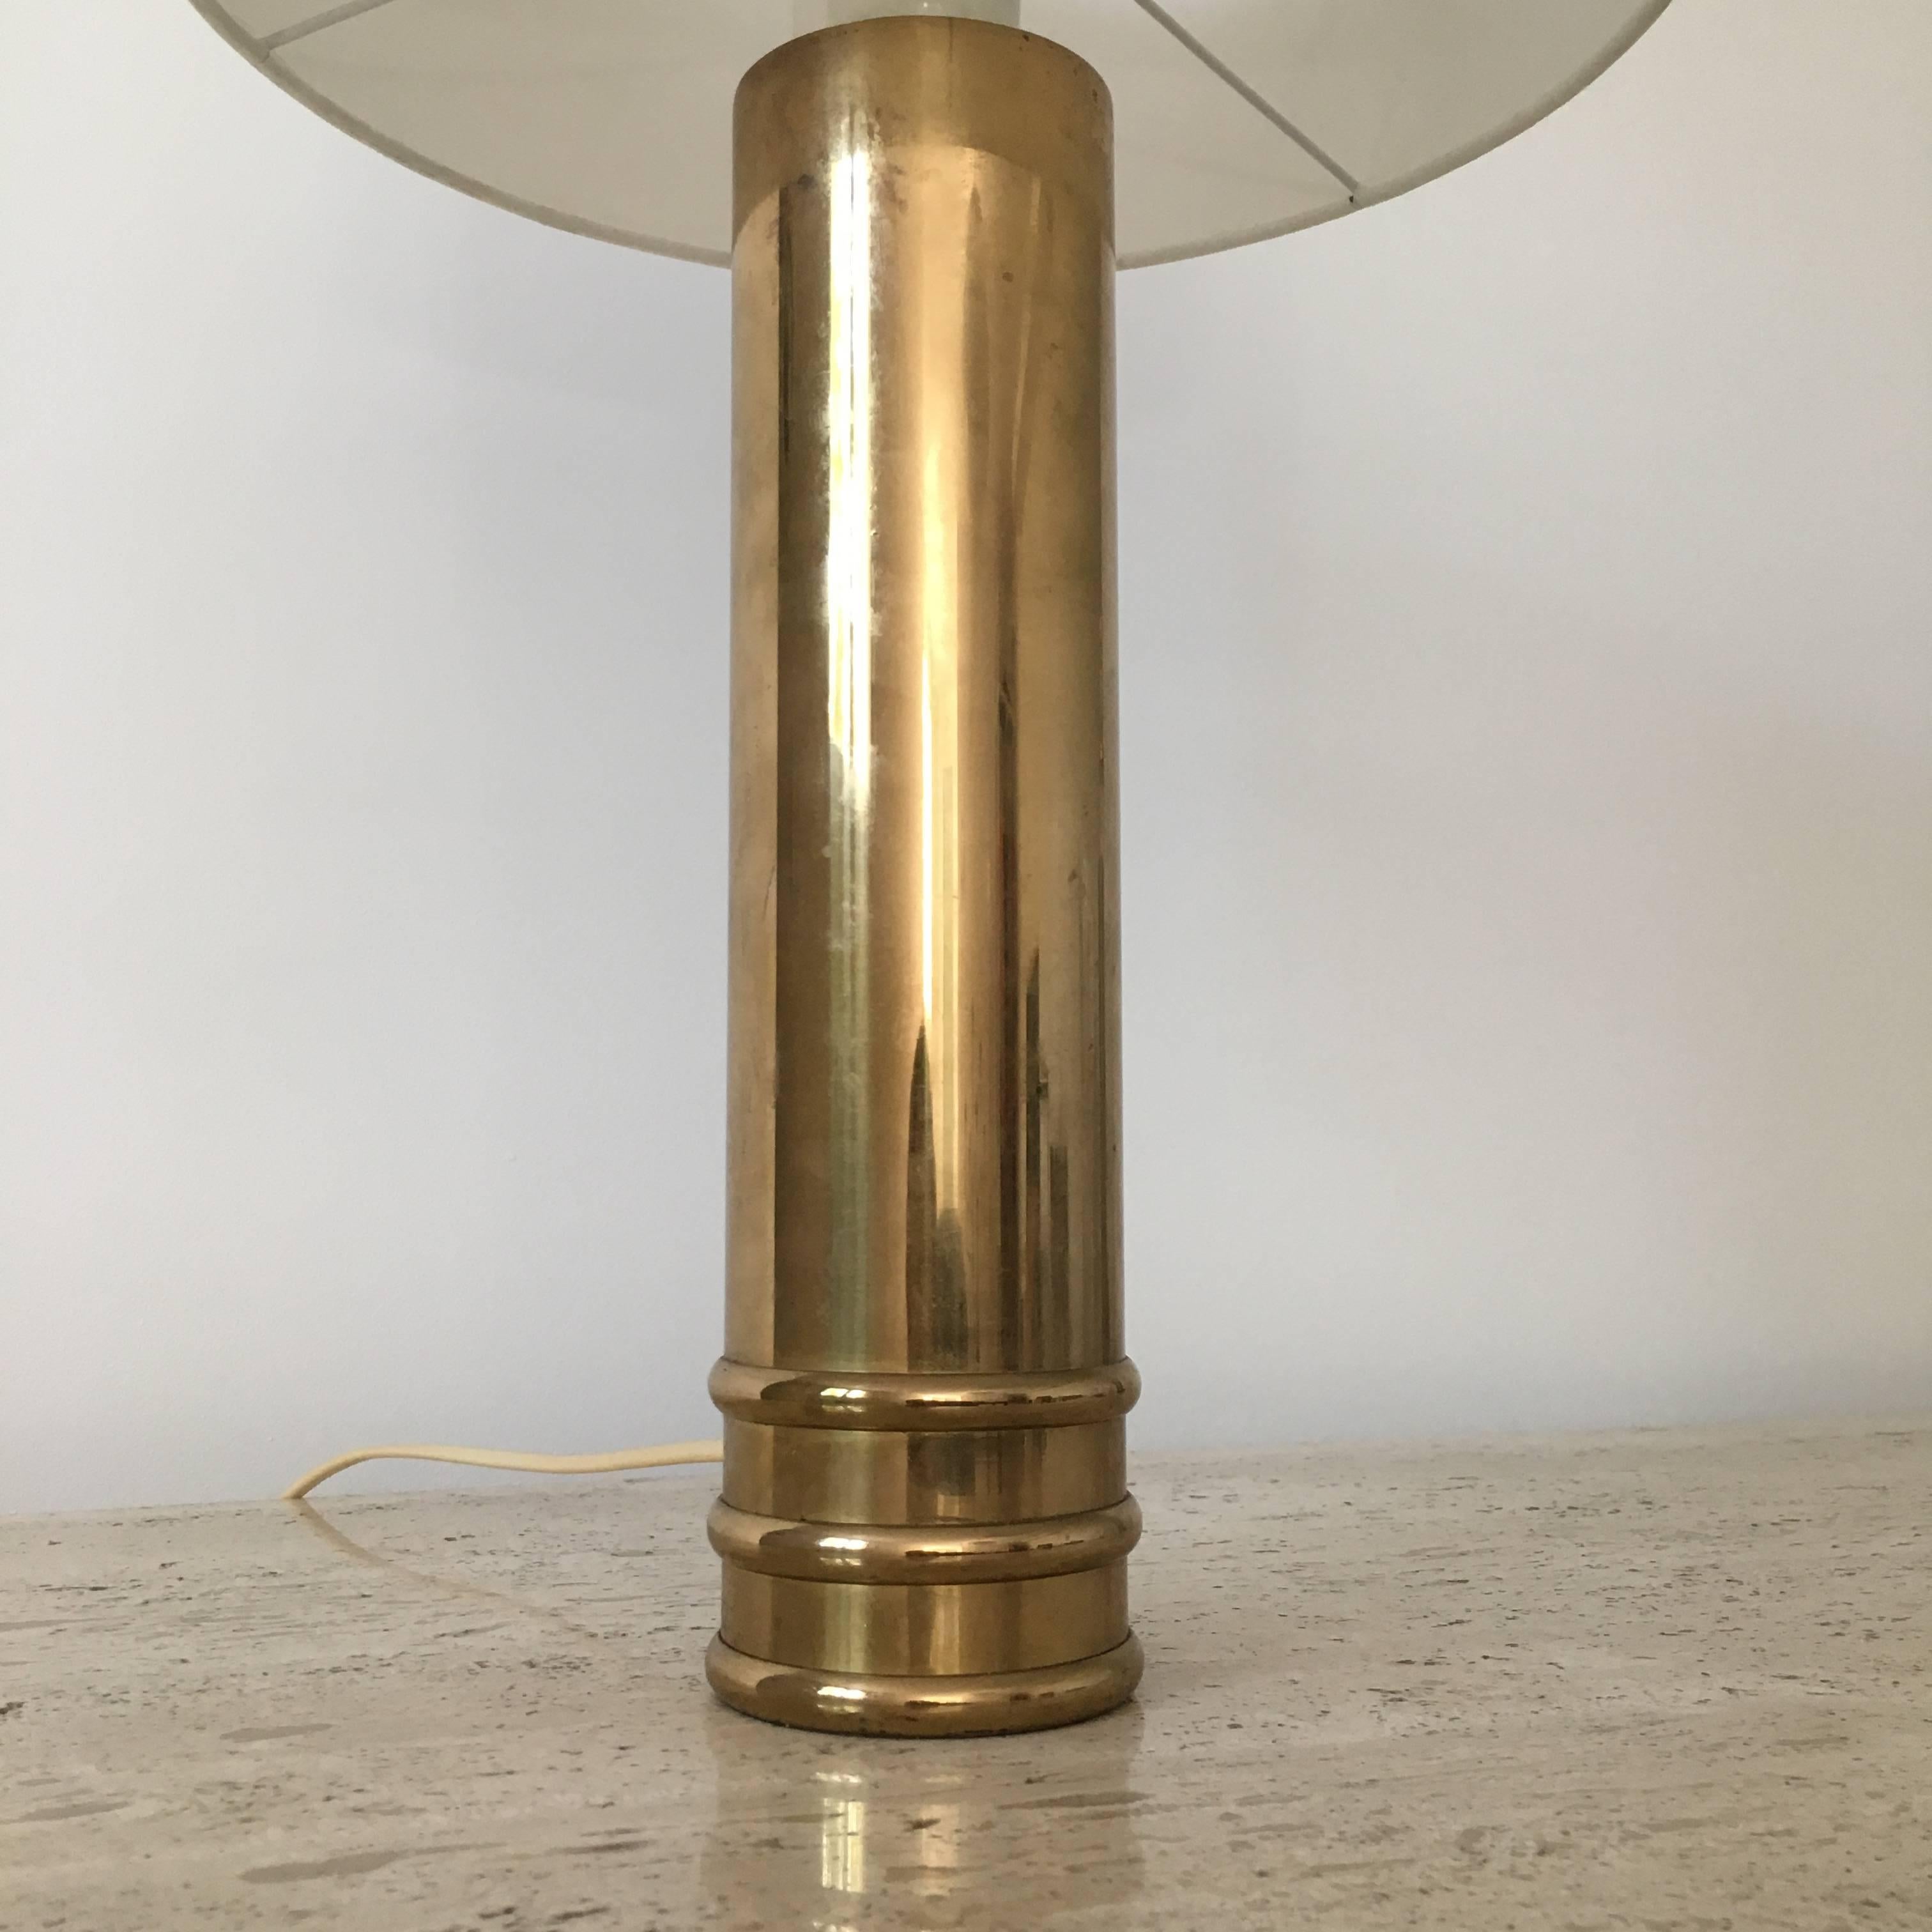 Scandinavian Modern Pair of Brass Table Lamps by Bergboms, Sweden, circa 1960 For Sale